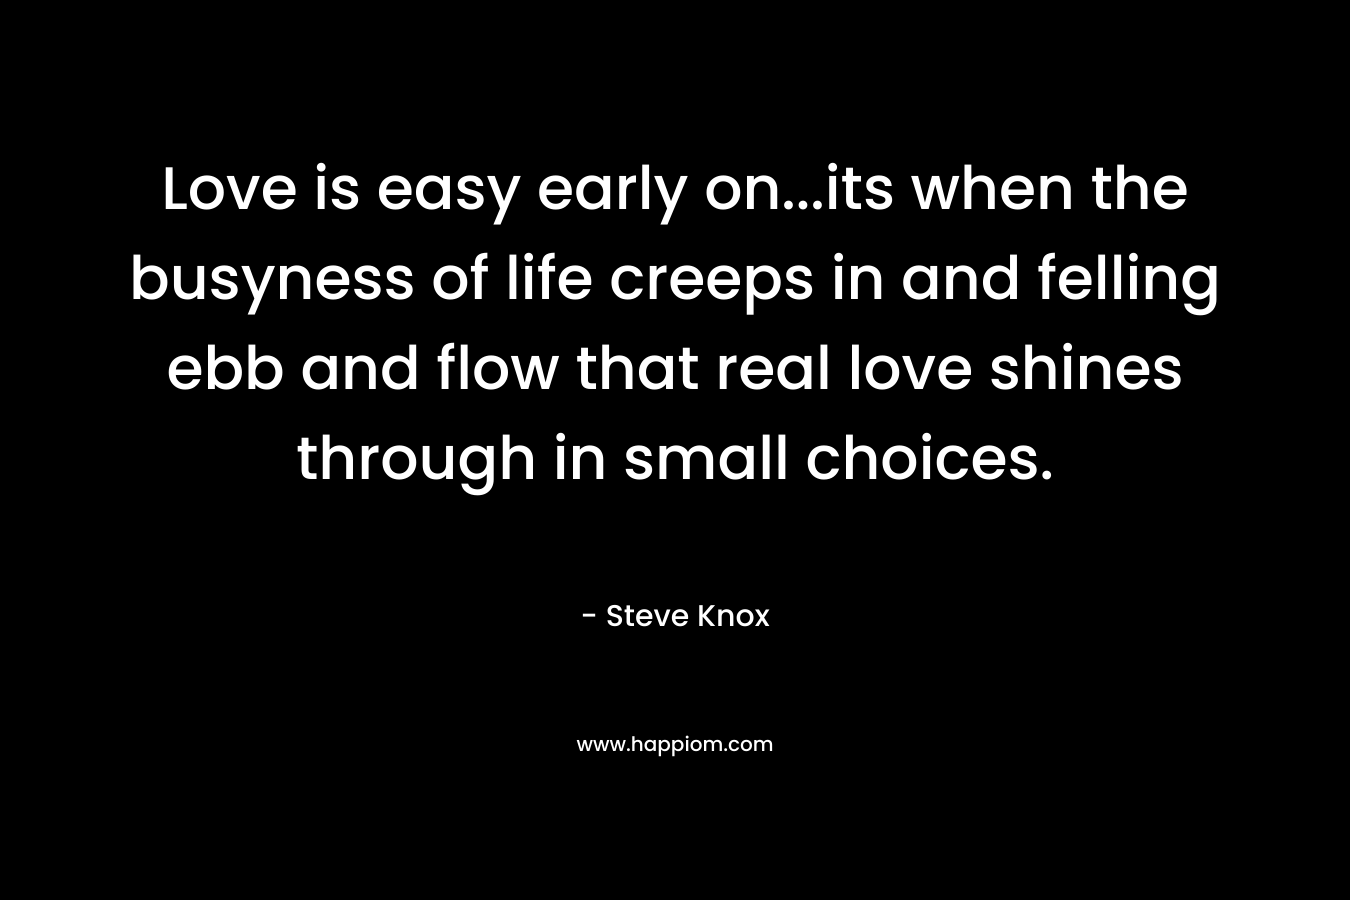 Love is easy early on...its when the busyness of life creeps in and felling ebb and flow that real love shines through in small choices.